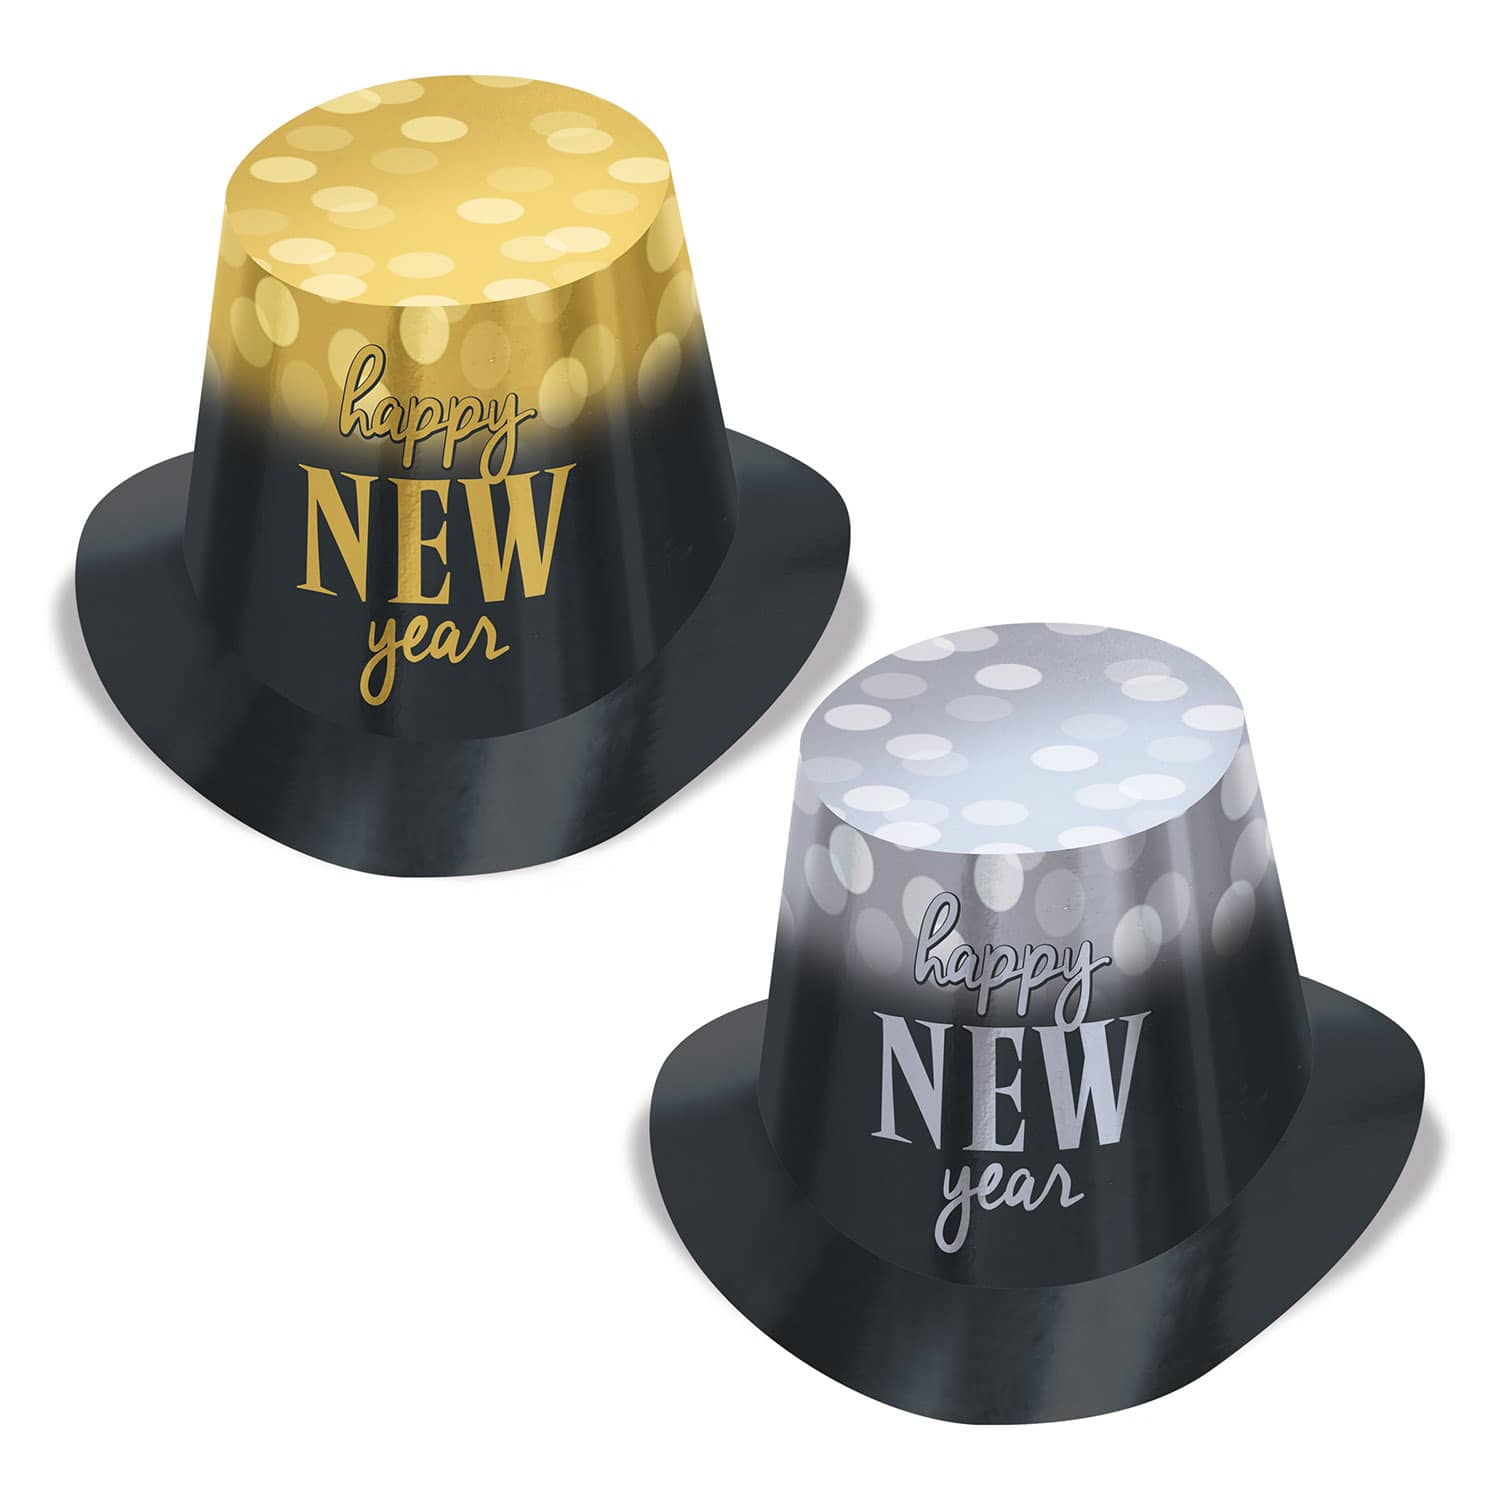 New Year Lights Hi-Hats for New Years Eve Parties